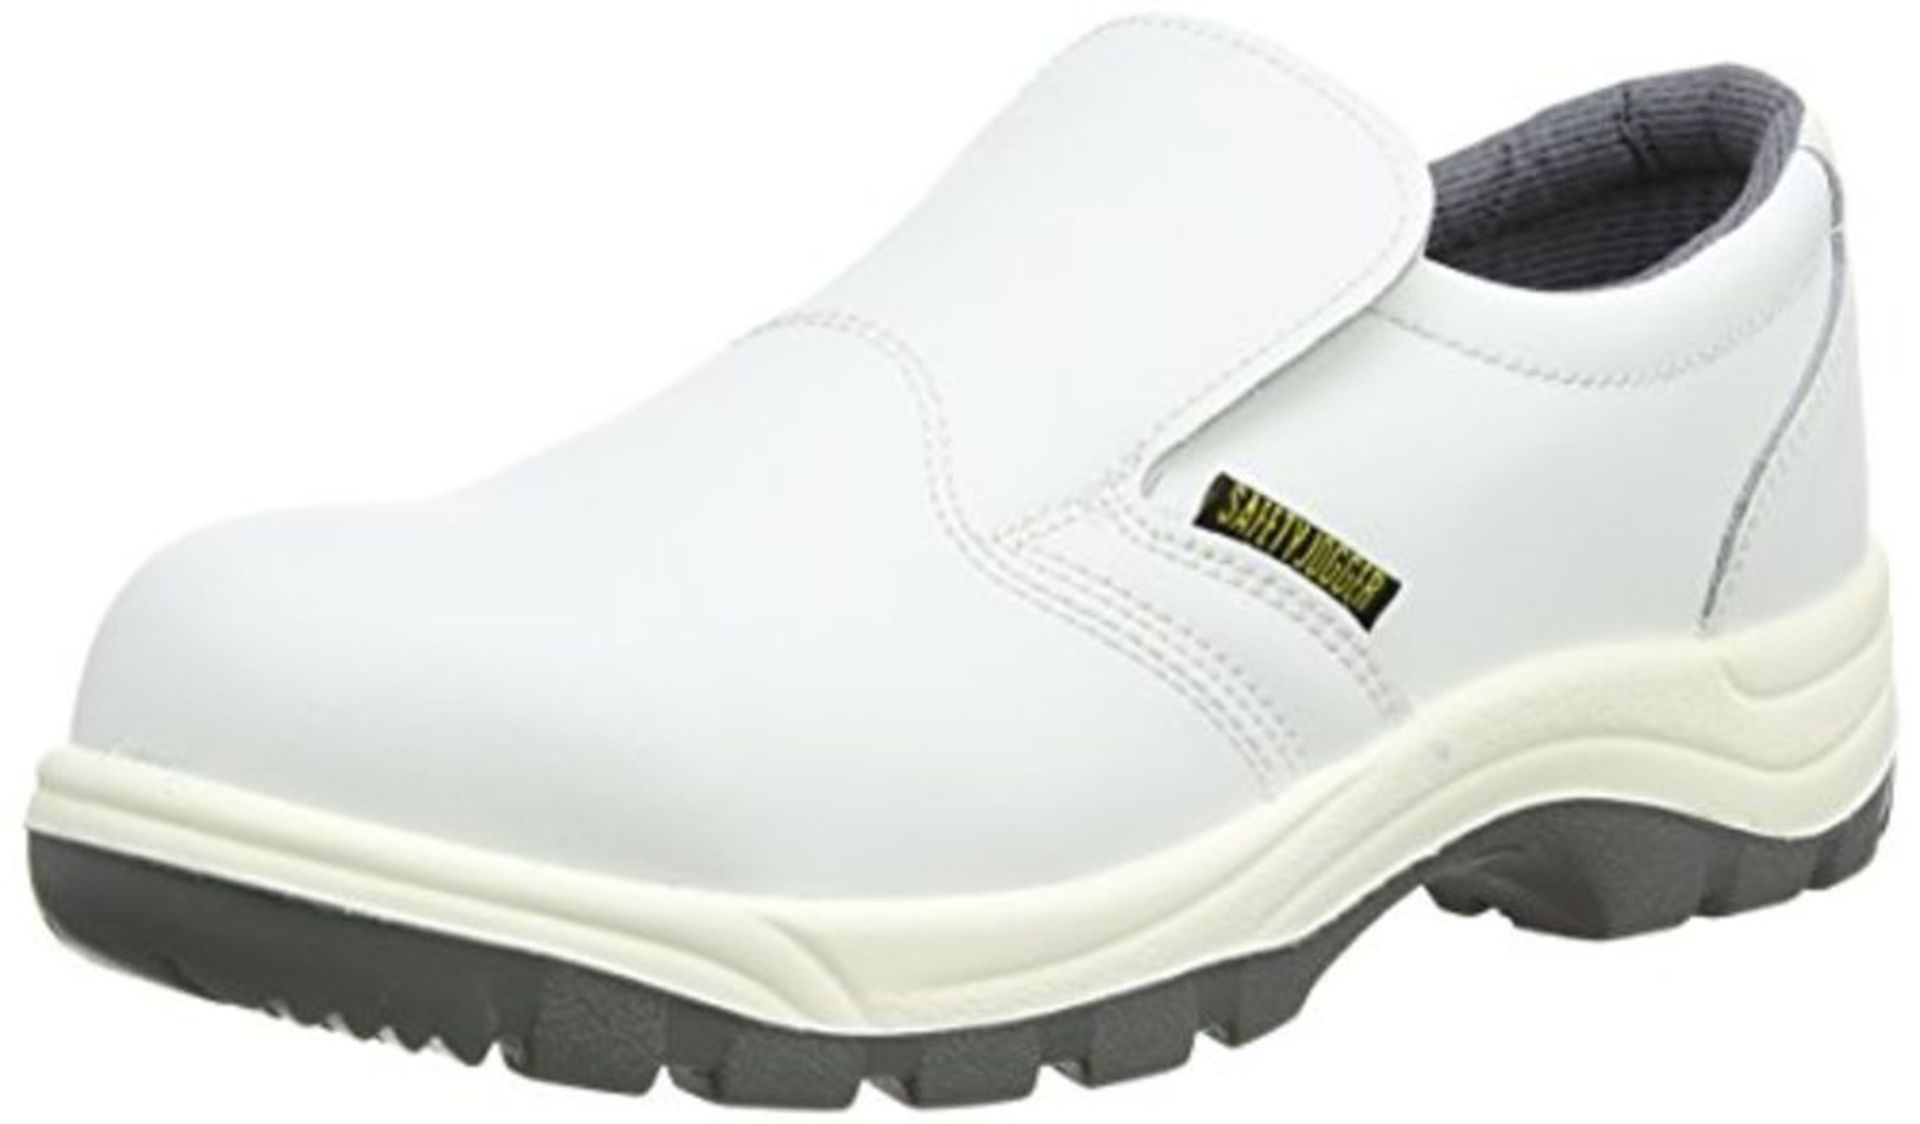 Steel Toe Cap Safety Clog - Safety Jogger Industrial X0500 White, 7.5 UK